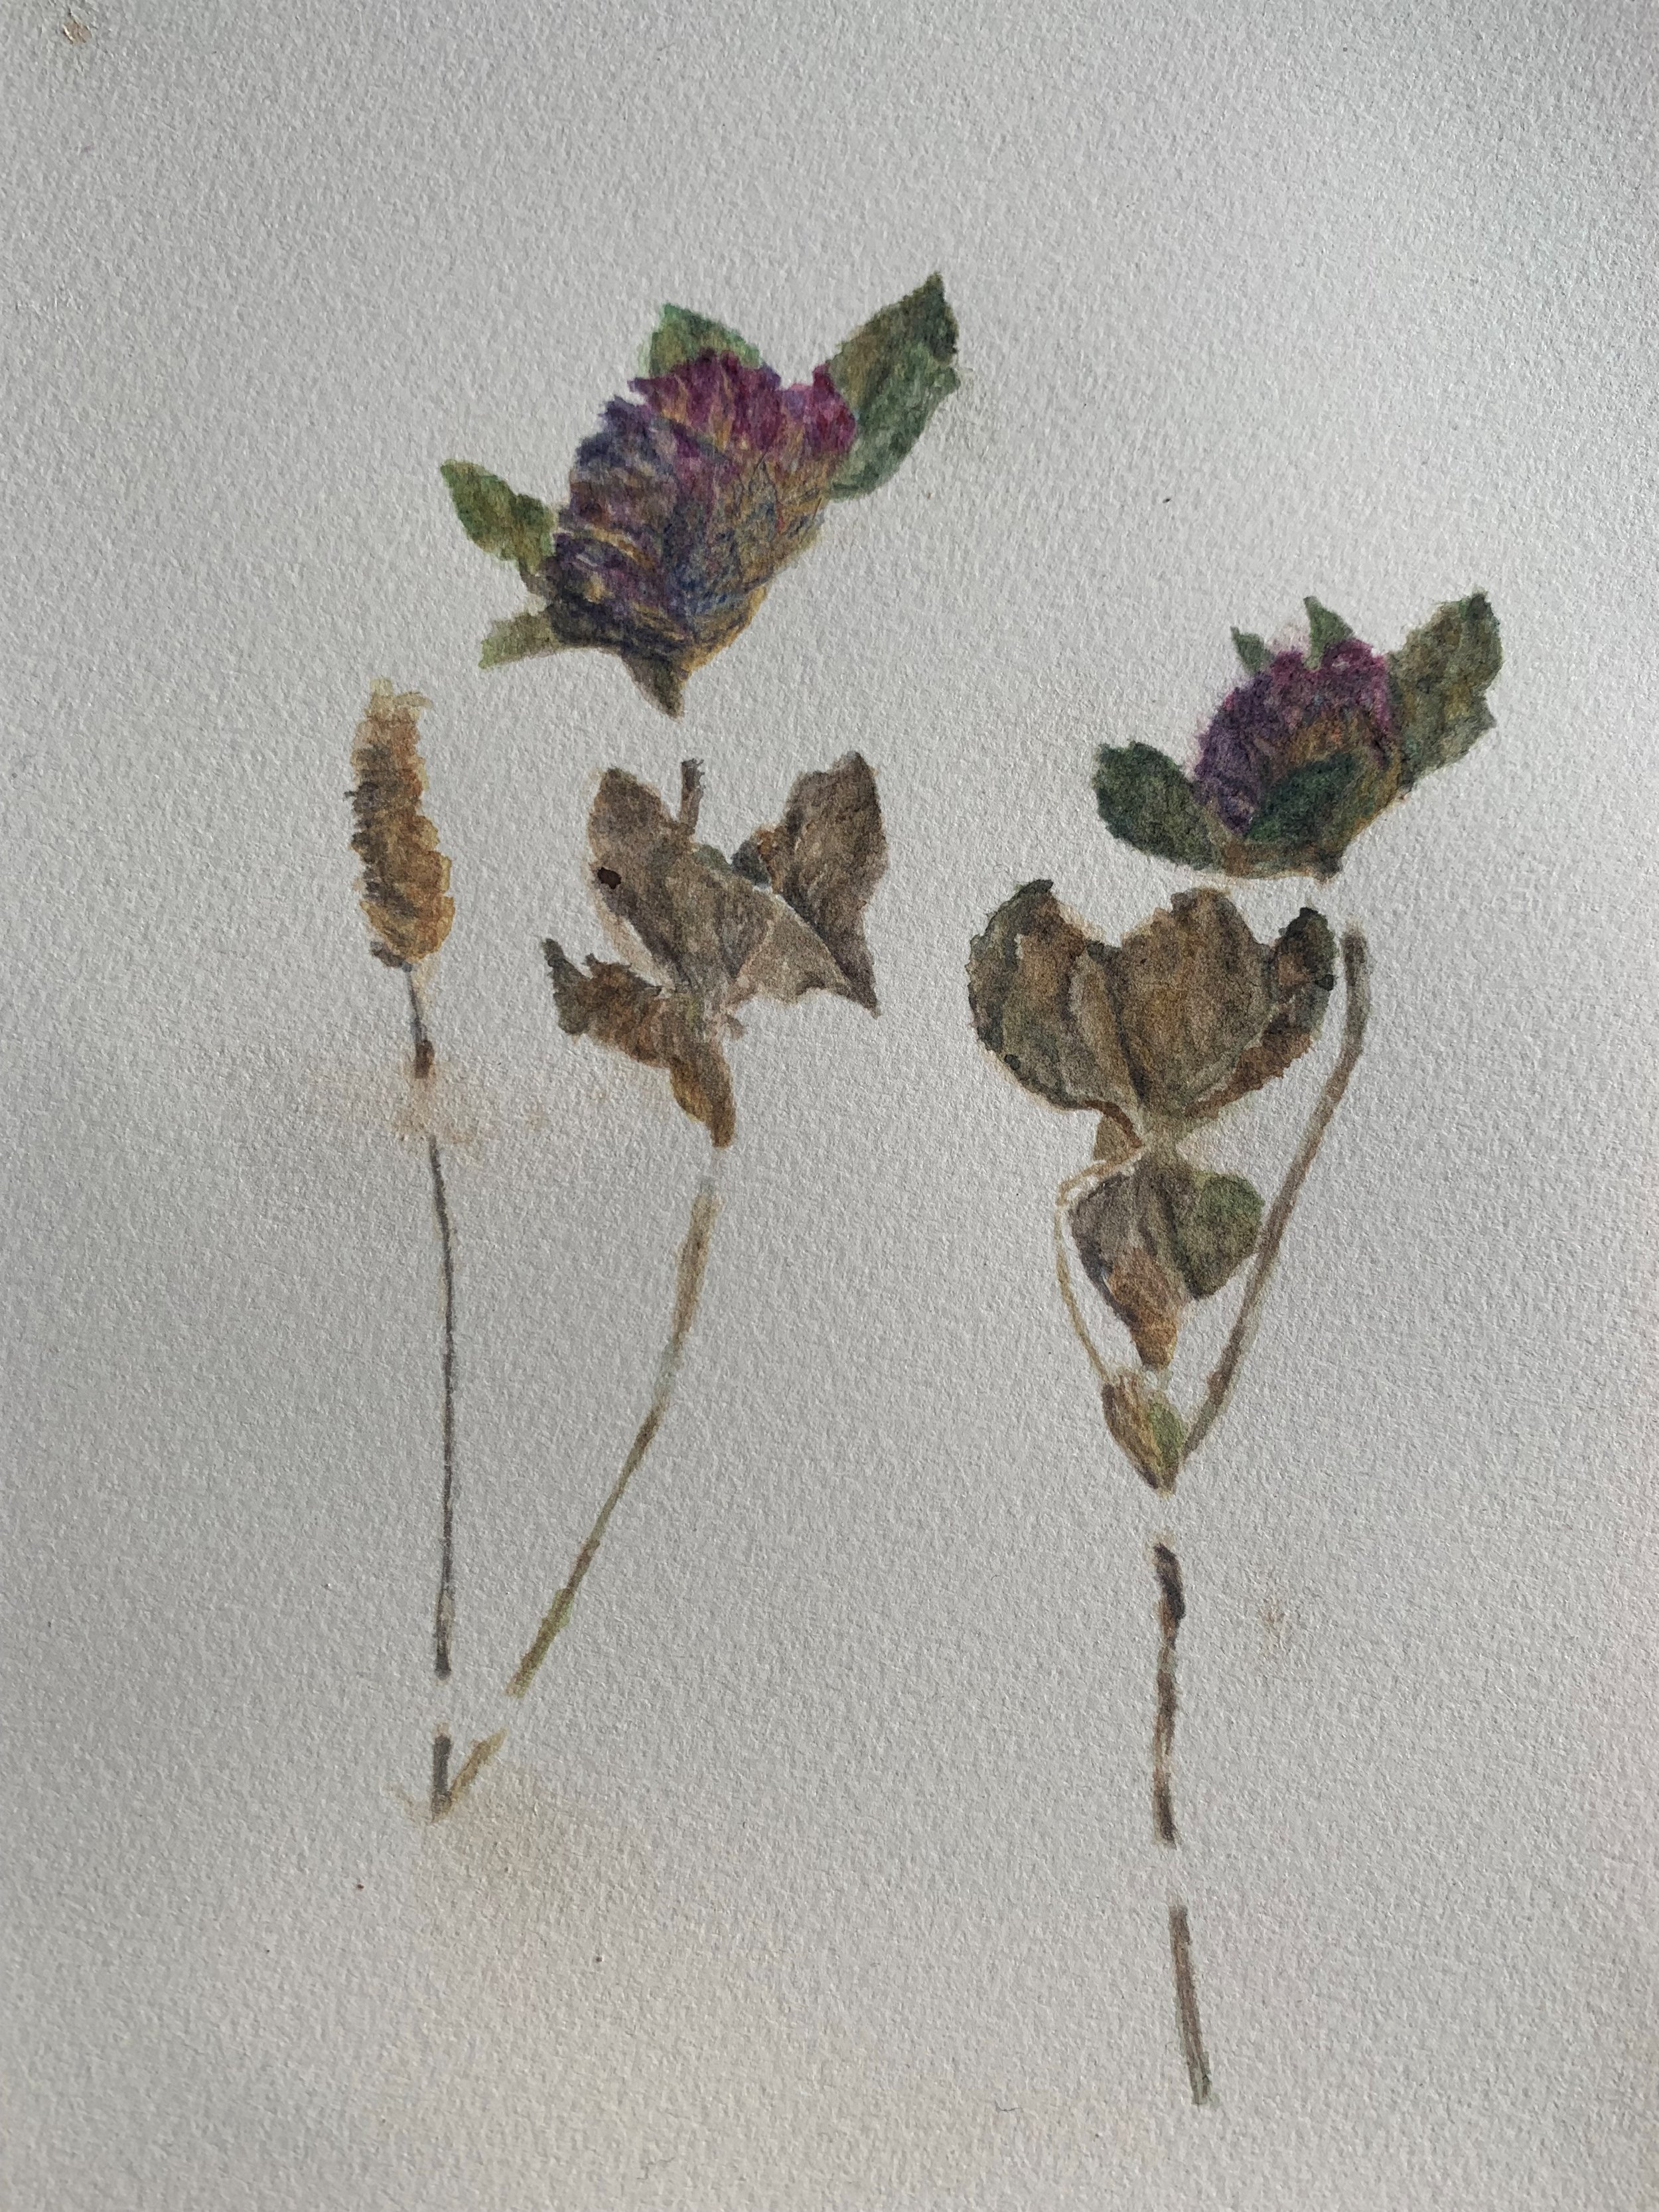 red clover, Faringdon Folly, 21, homage to Miss Todd, study